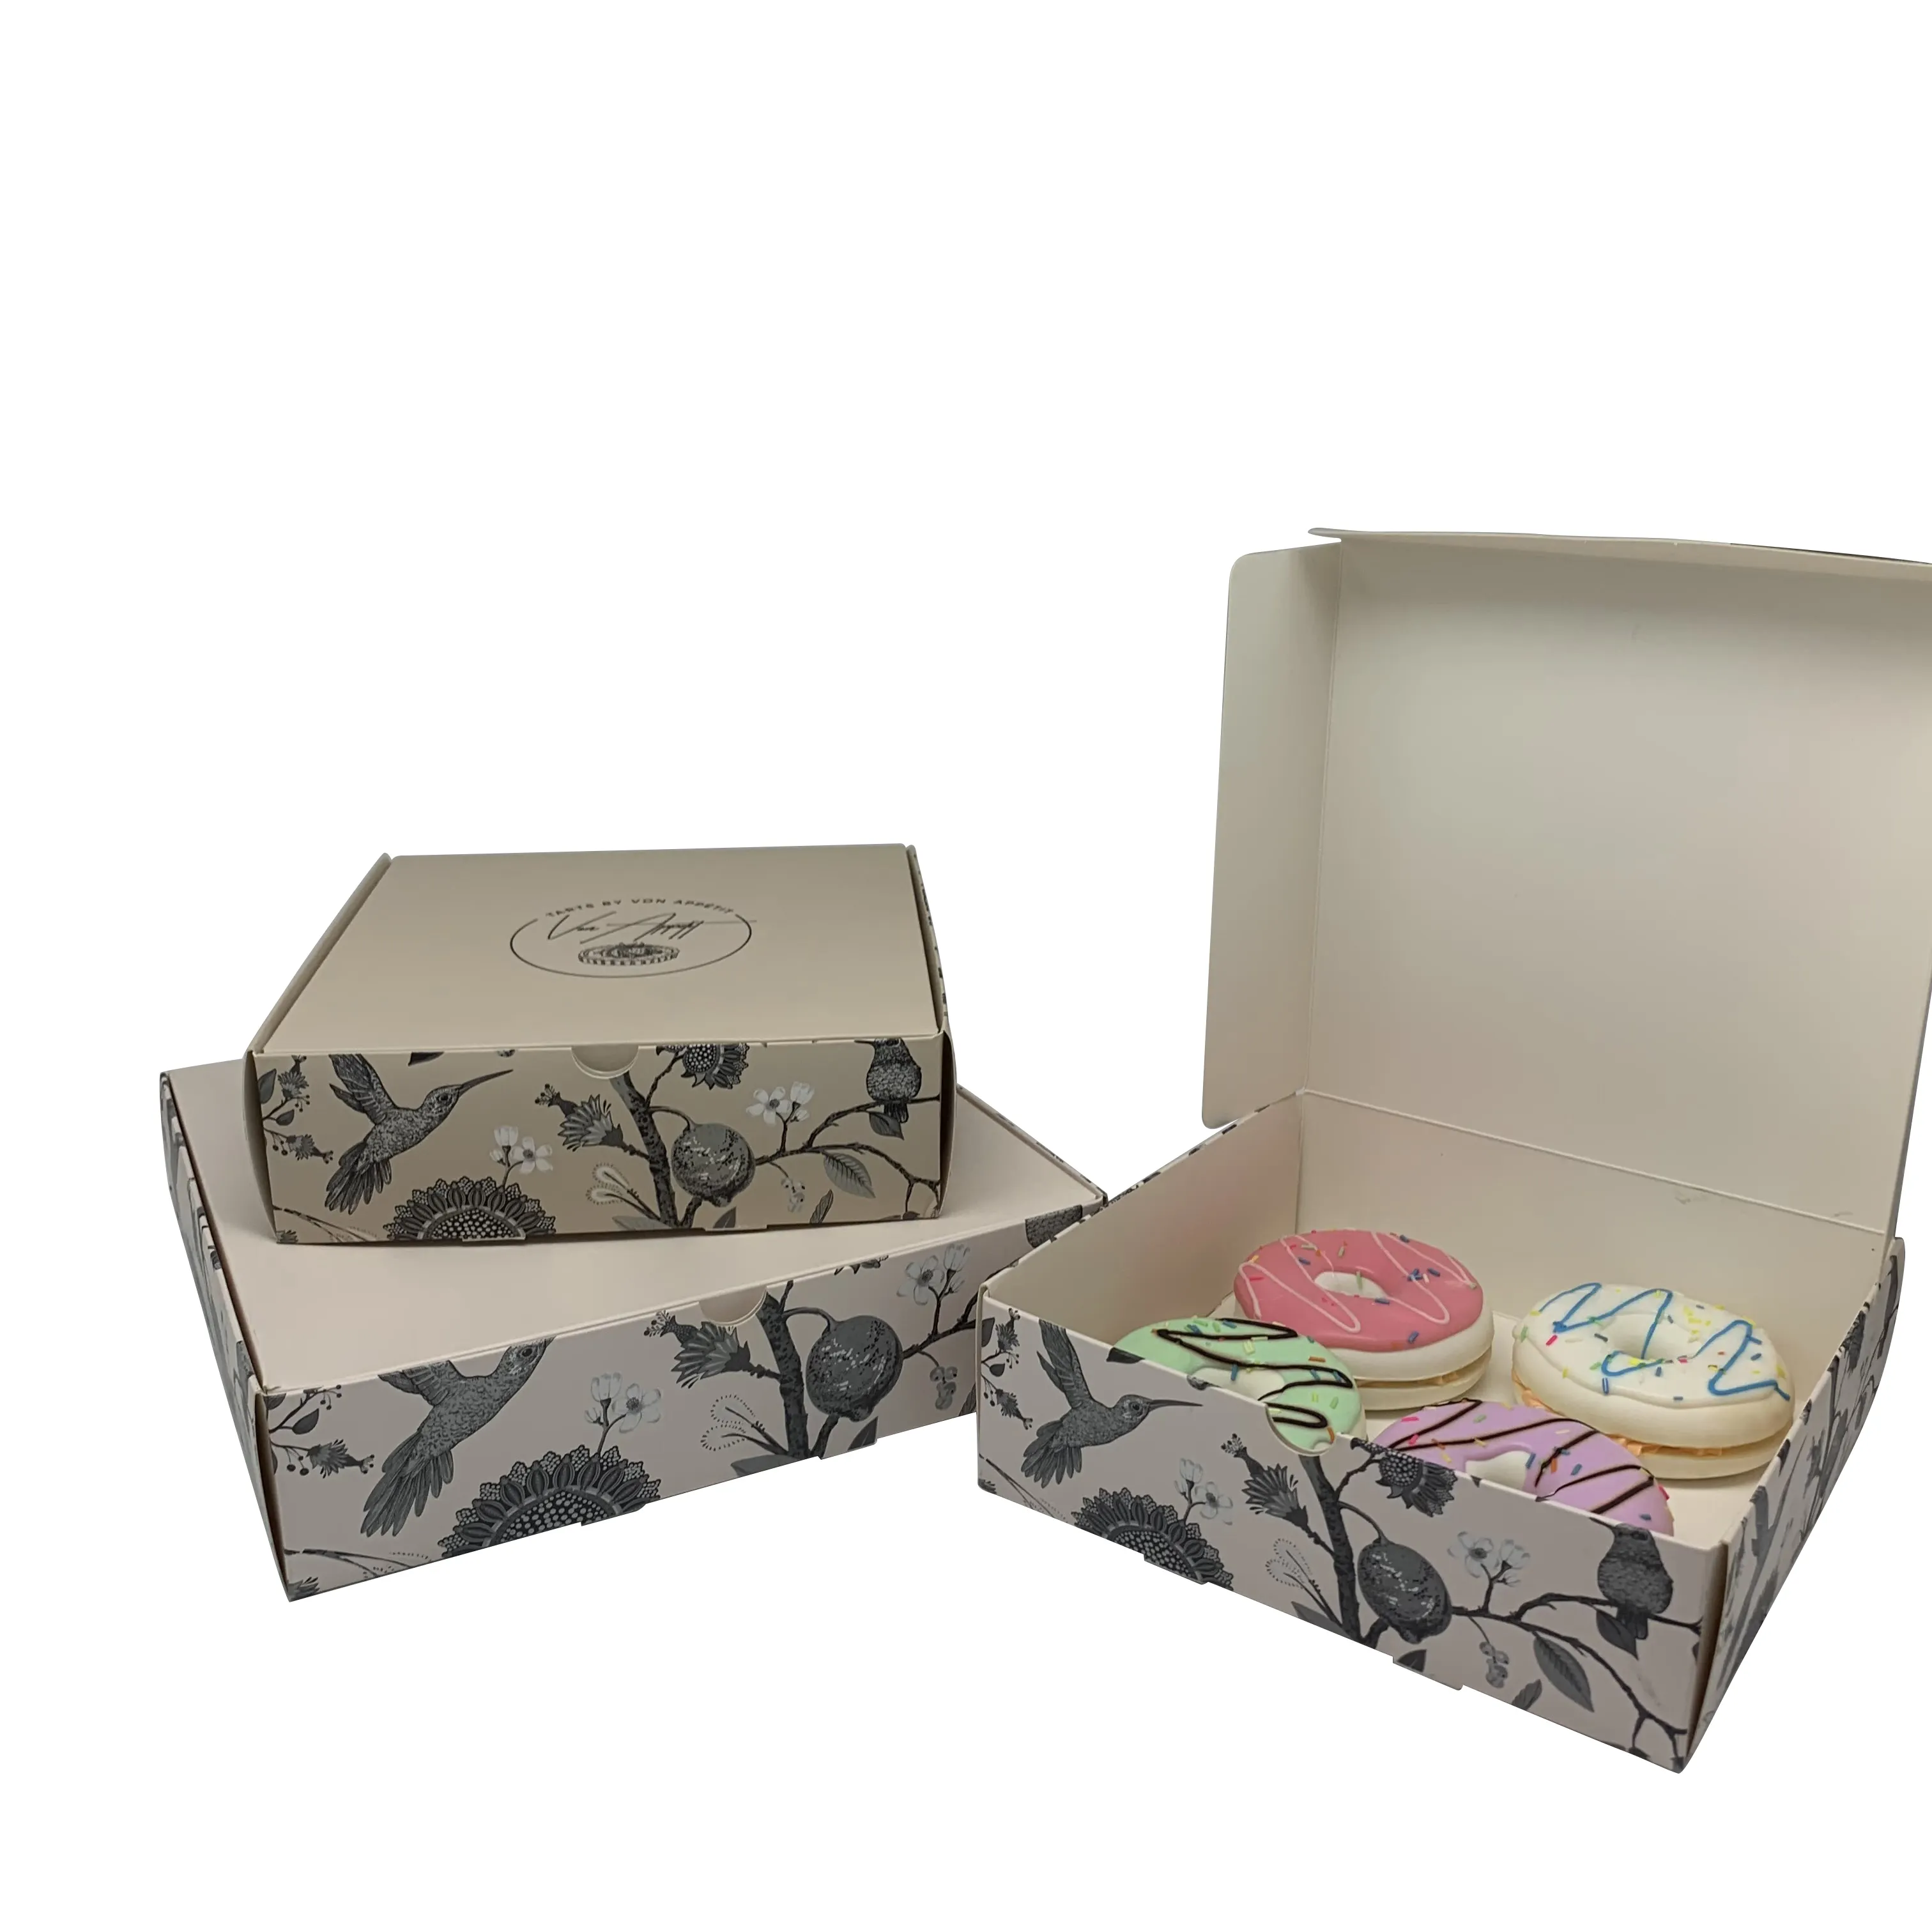 Unique Flower Design Customized Logo Cake Packaging 4 6 12 inch Cake Box High Quality Donut Macaron Cookies Packaging Paper Box